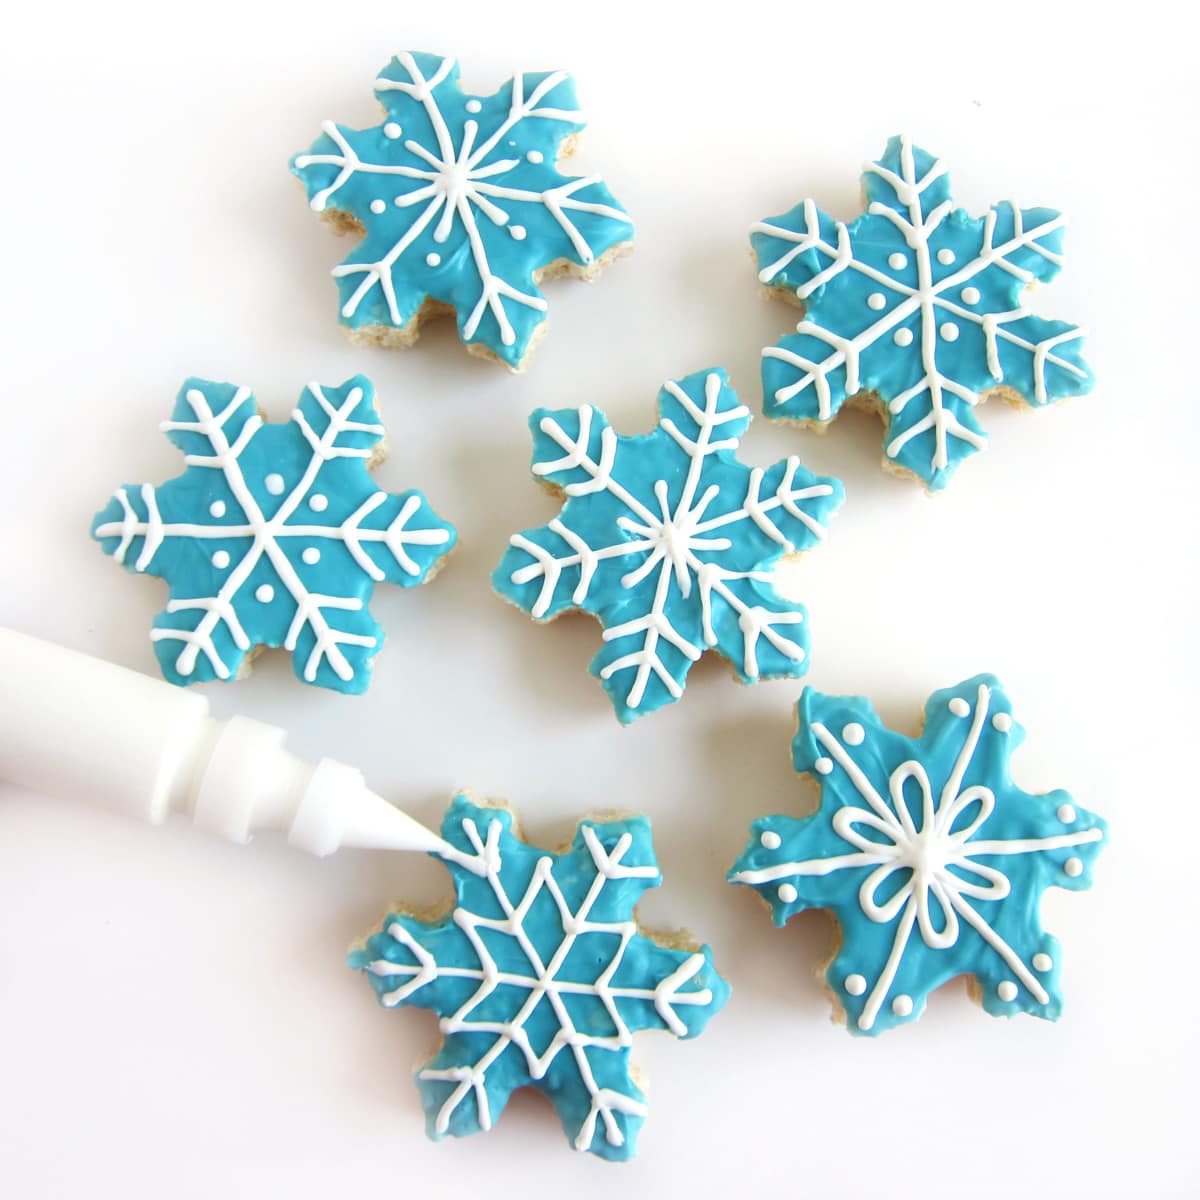 six blue-colored Rice Krispie Treat snowflakes decorated with a variety of white chocolate snowflake designs.